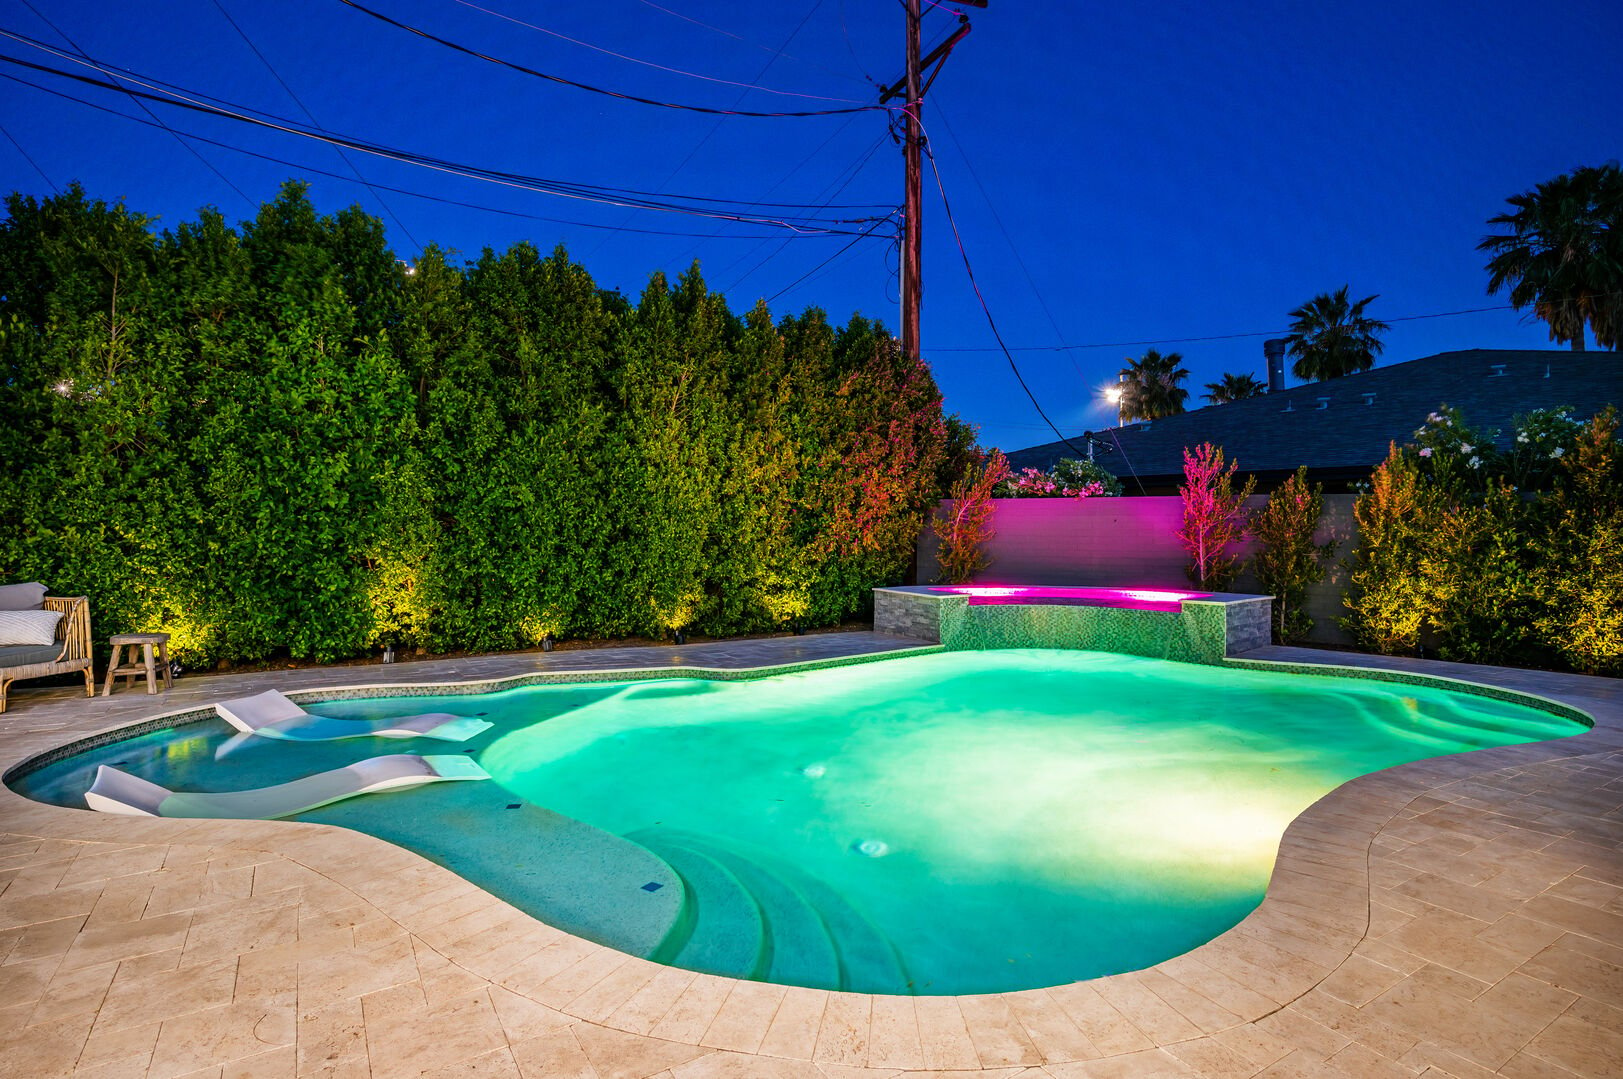 Take a cool night swim in the AZ summers.